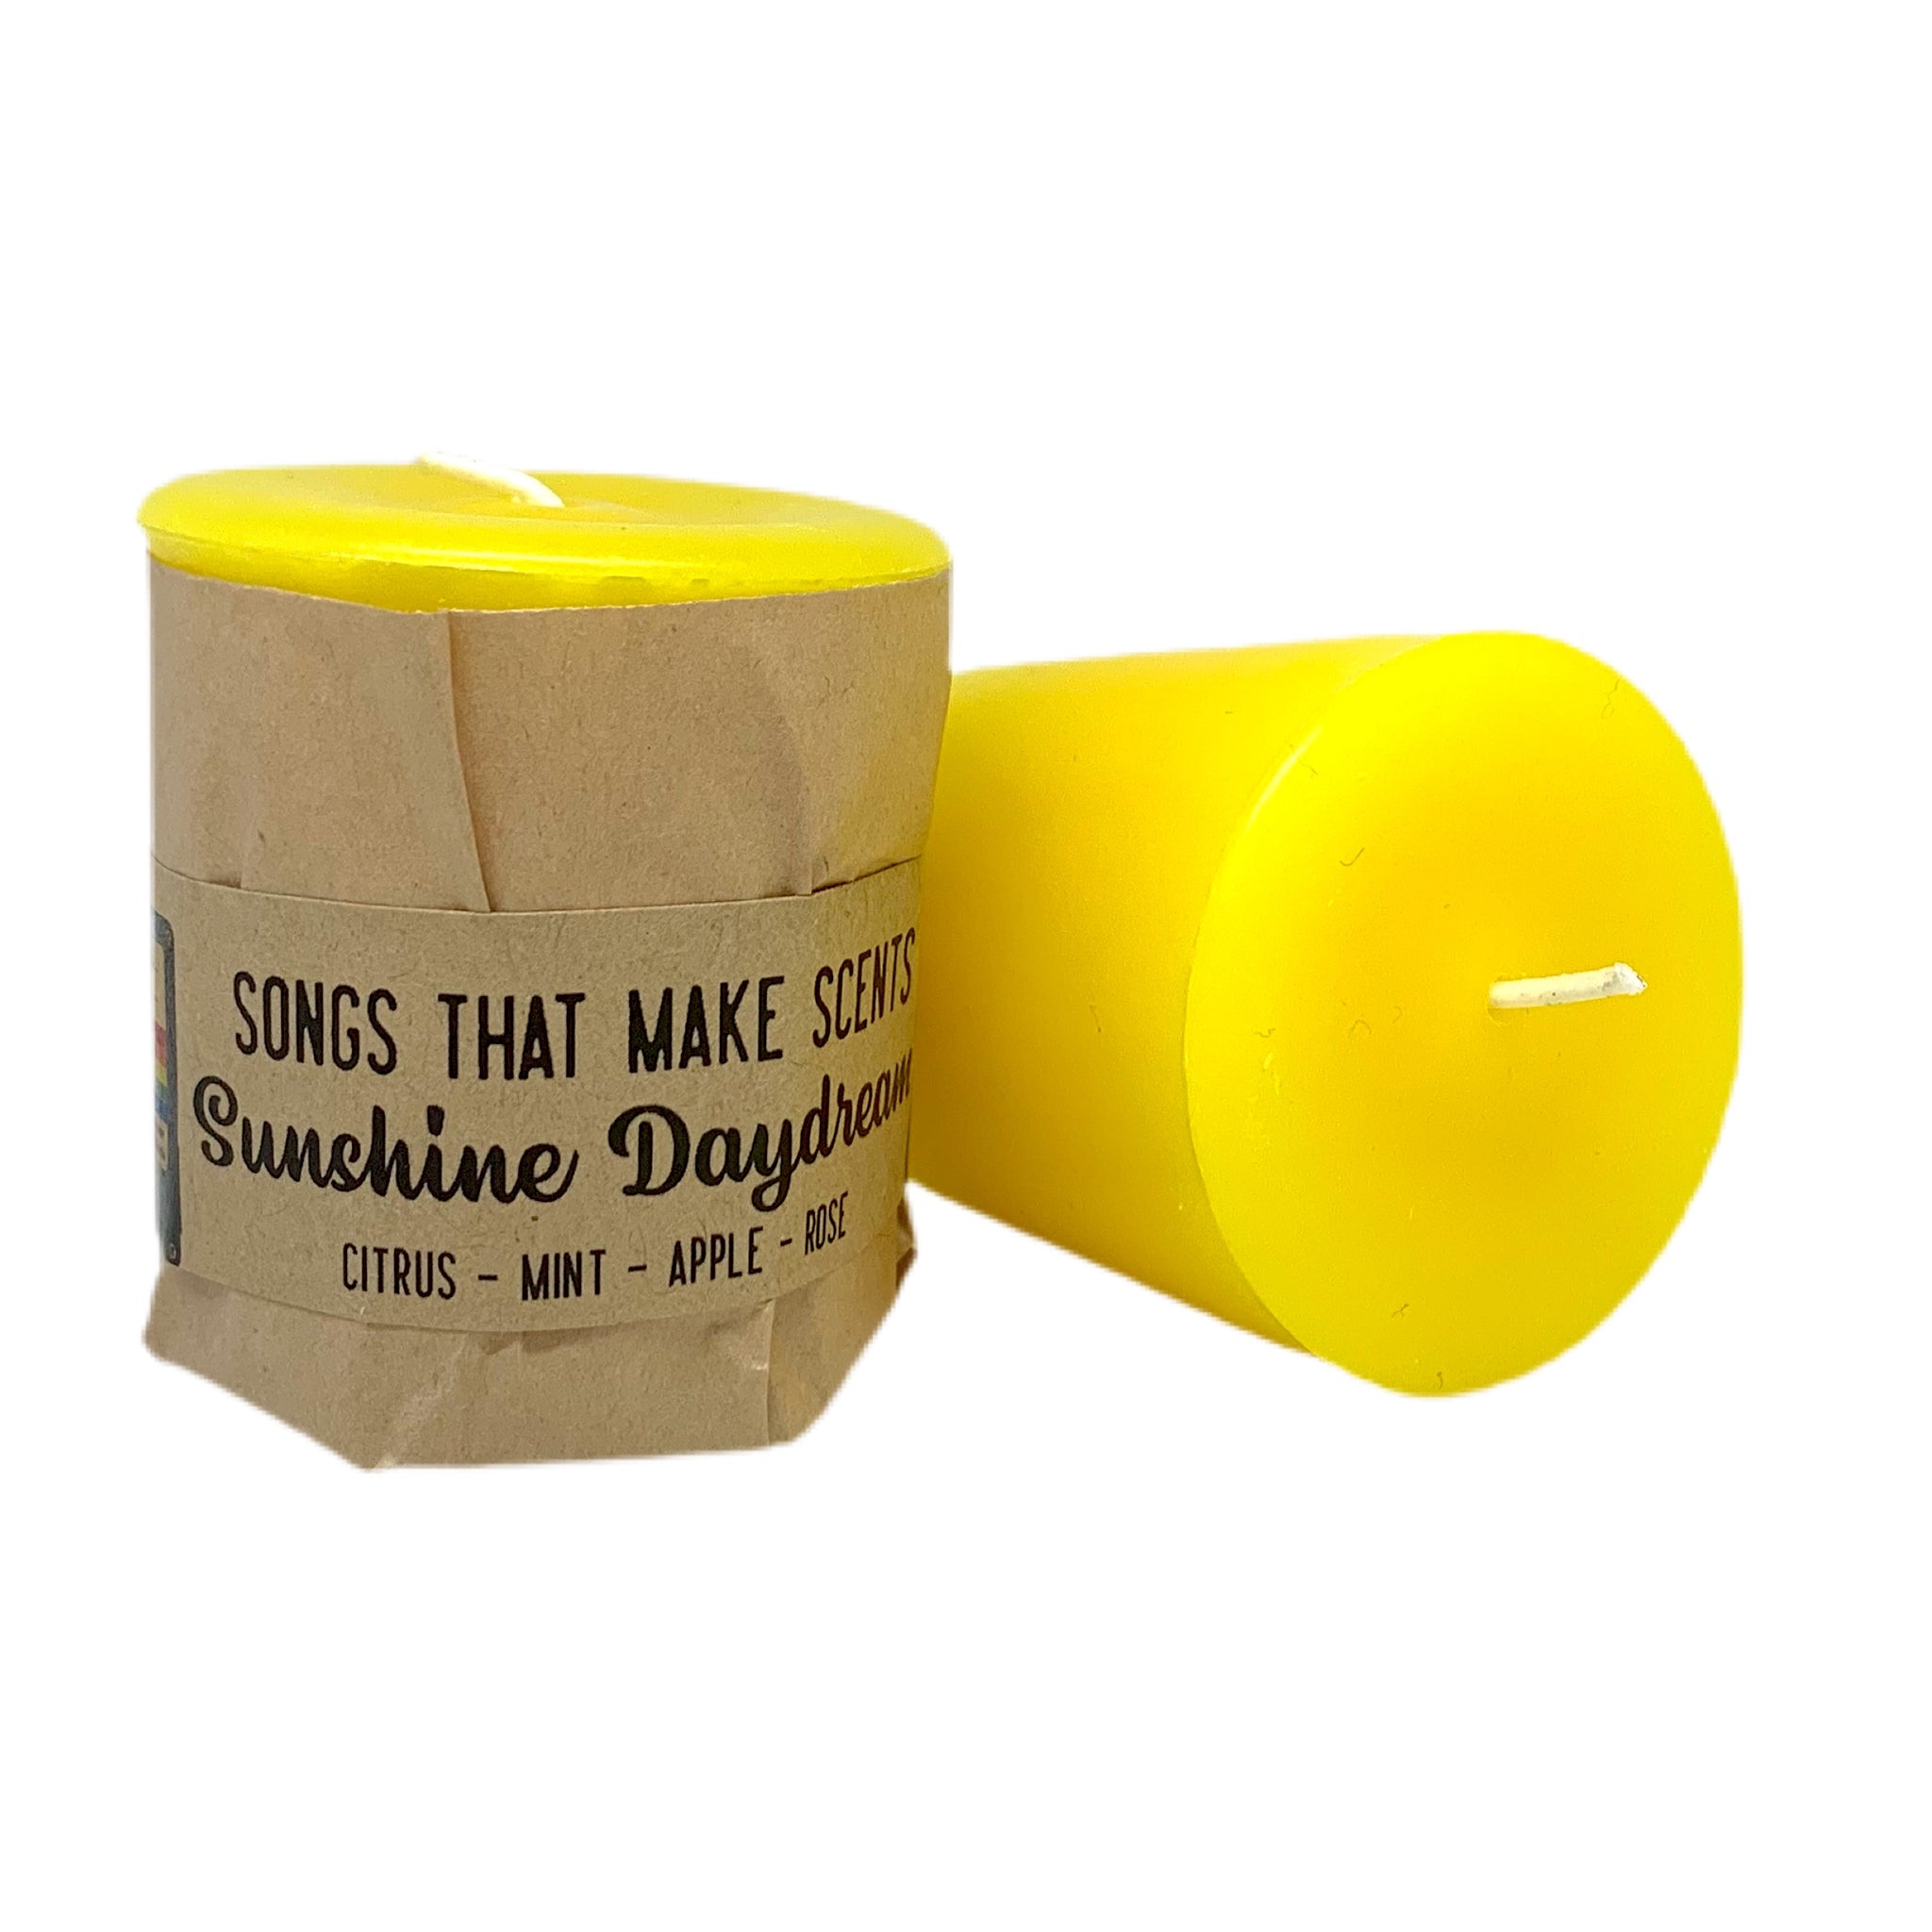 Sunshine Daydream Scented Votive Candles by Songs That Make Scents